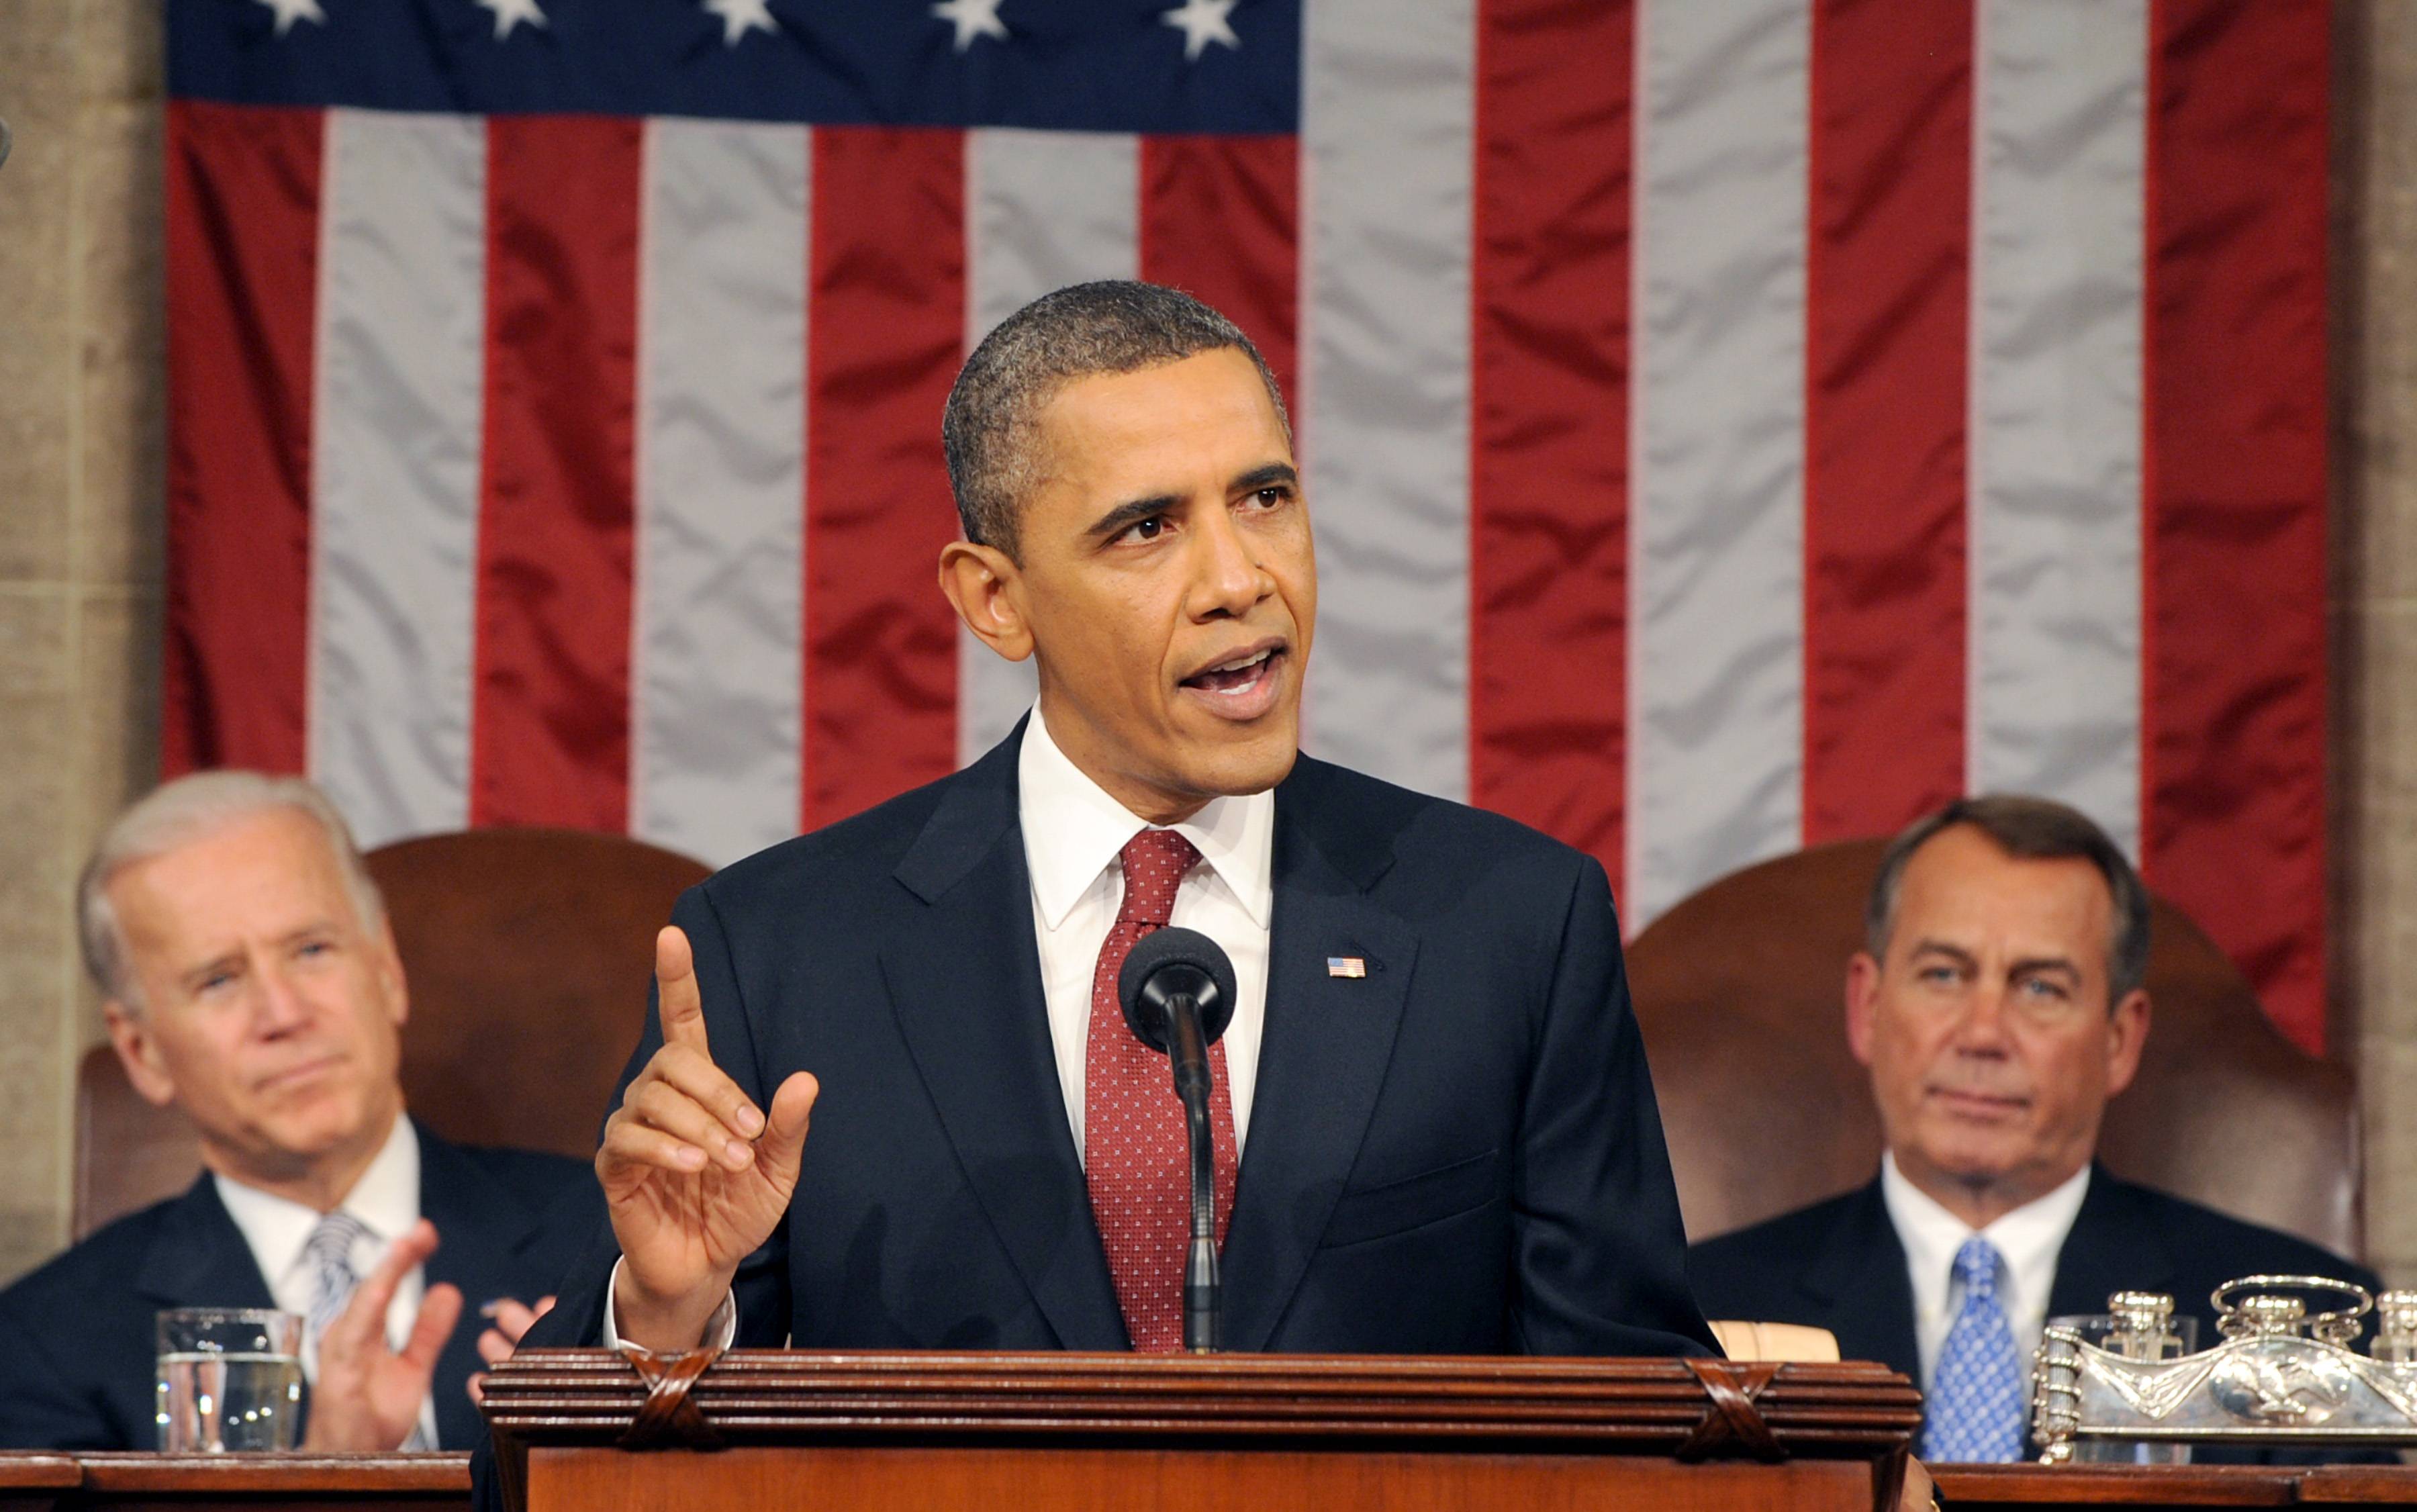 Barack Obama - “We can either settle for a country where a shrinking number of people do really well, while a growing number of Americans barely get by. Or we can restore an economy where everyone gets a fair shot, everyone does their fair share, and everyone plays by the same set of rules,” said President Obama in his third State of the Union address.(Photo: Saul Loeb-Pool/Getty Images)